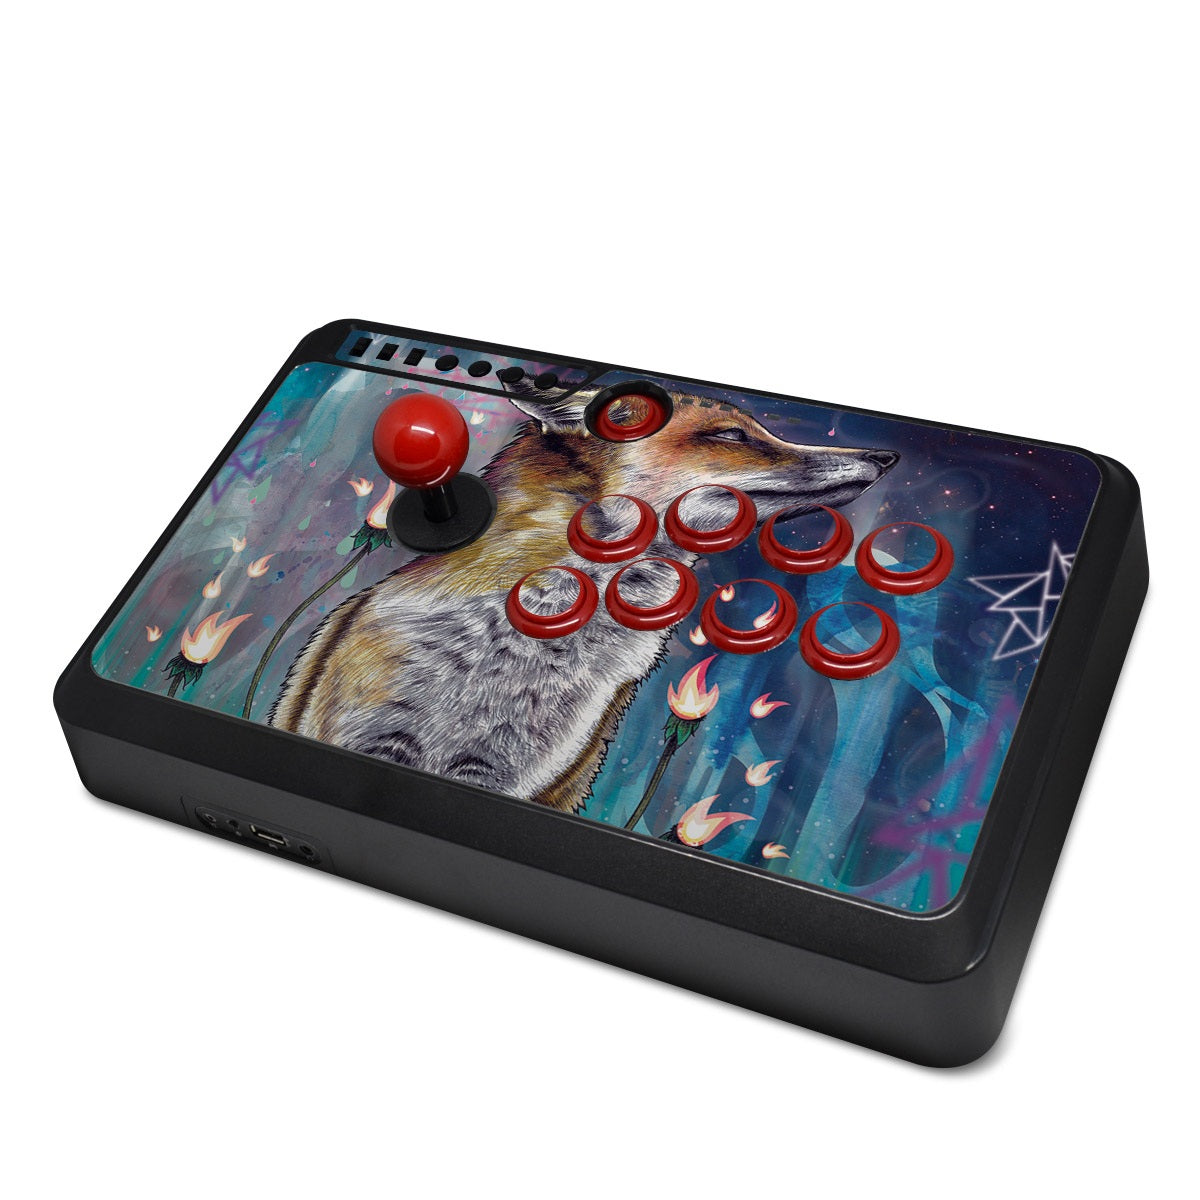 There is a Light - Mayflash F500 Arcade Fightstick Skin